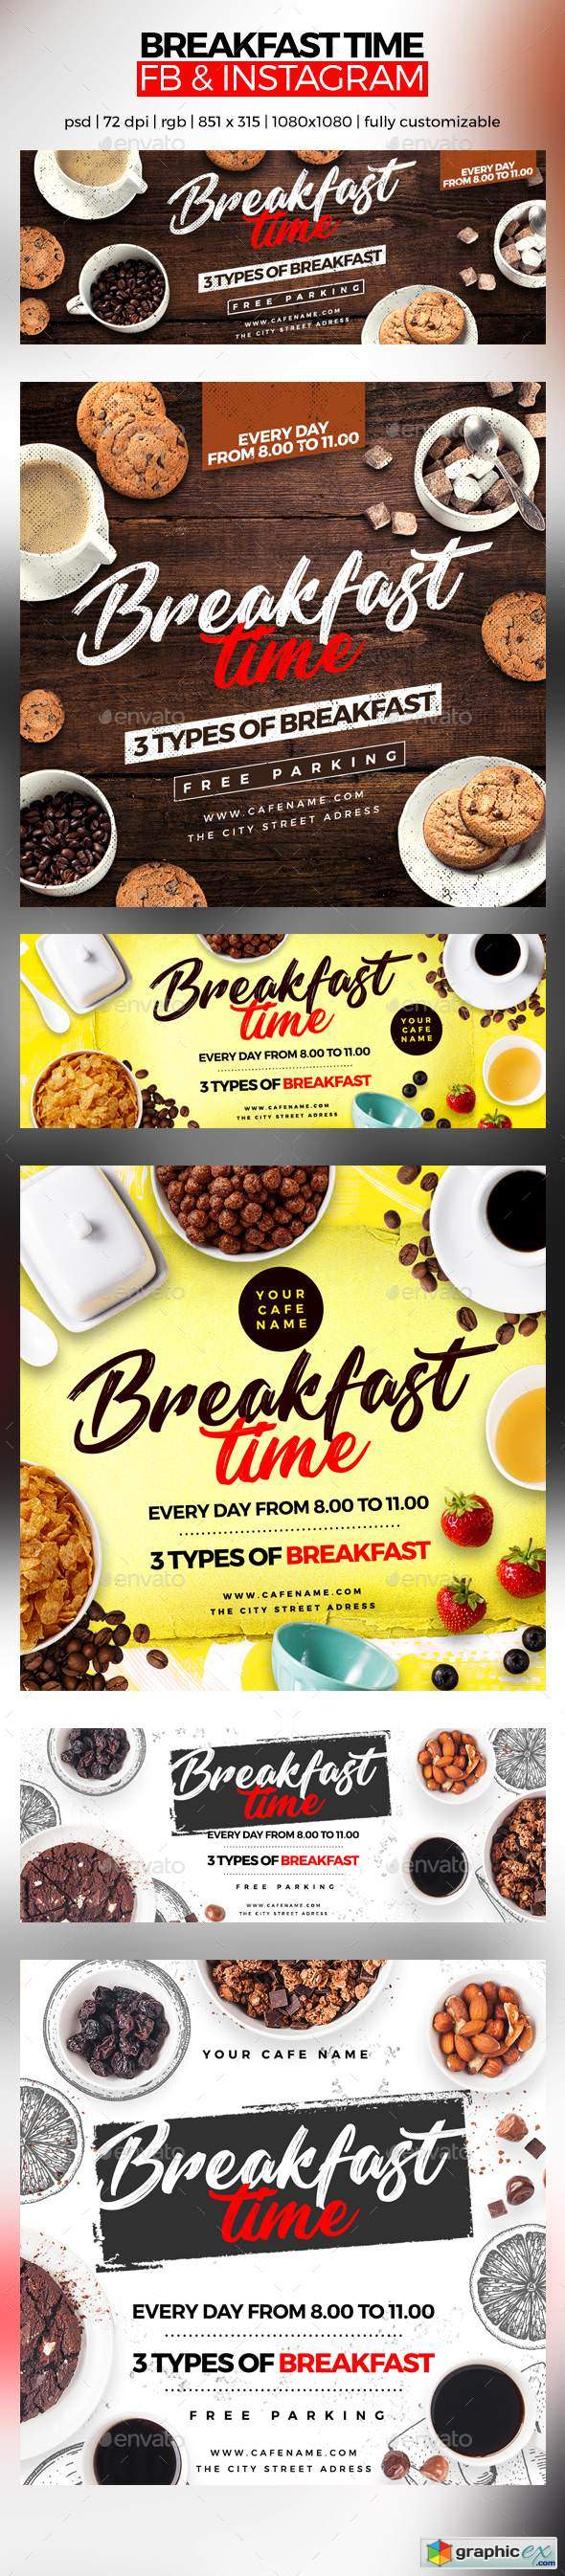 Breakfast Time Facebook Cover and Instagram